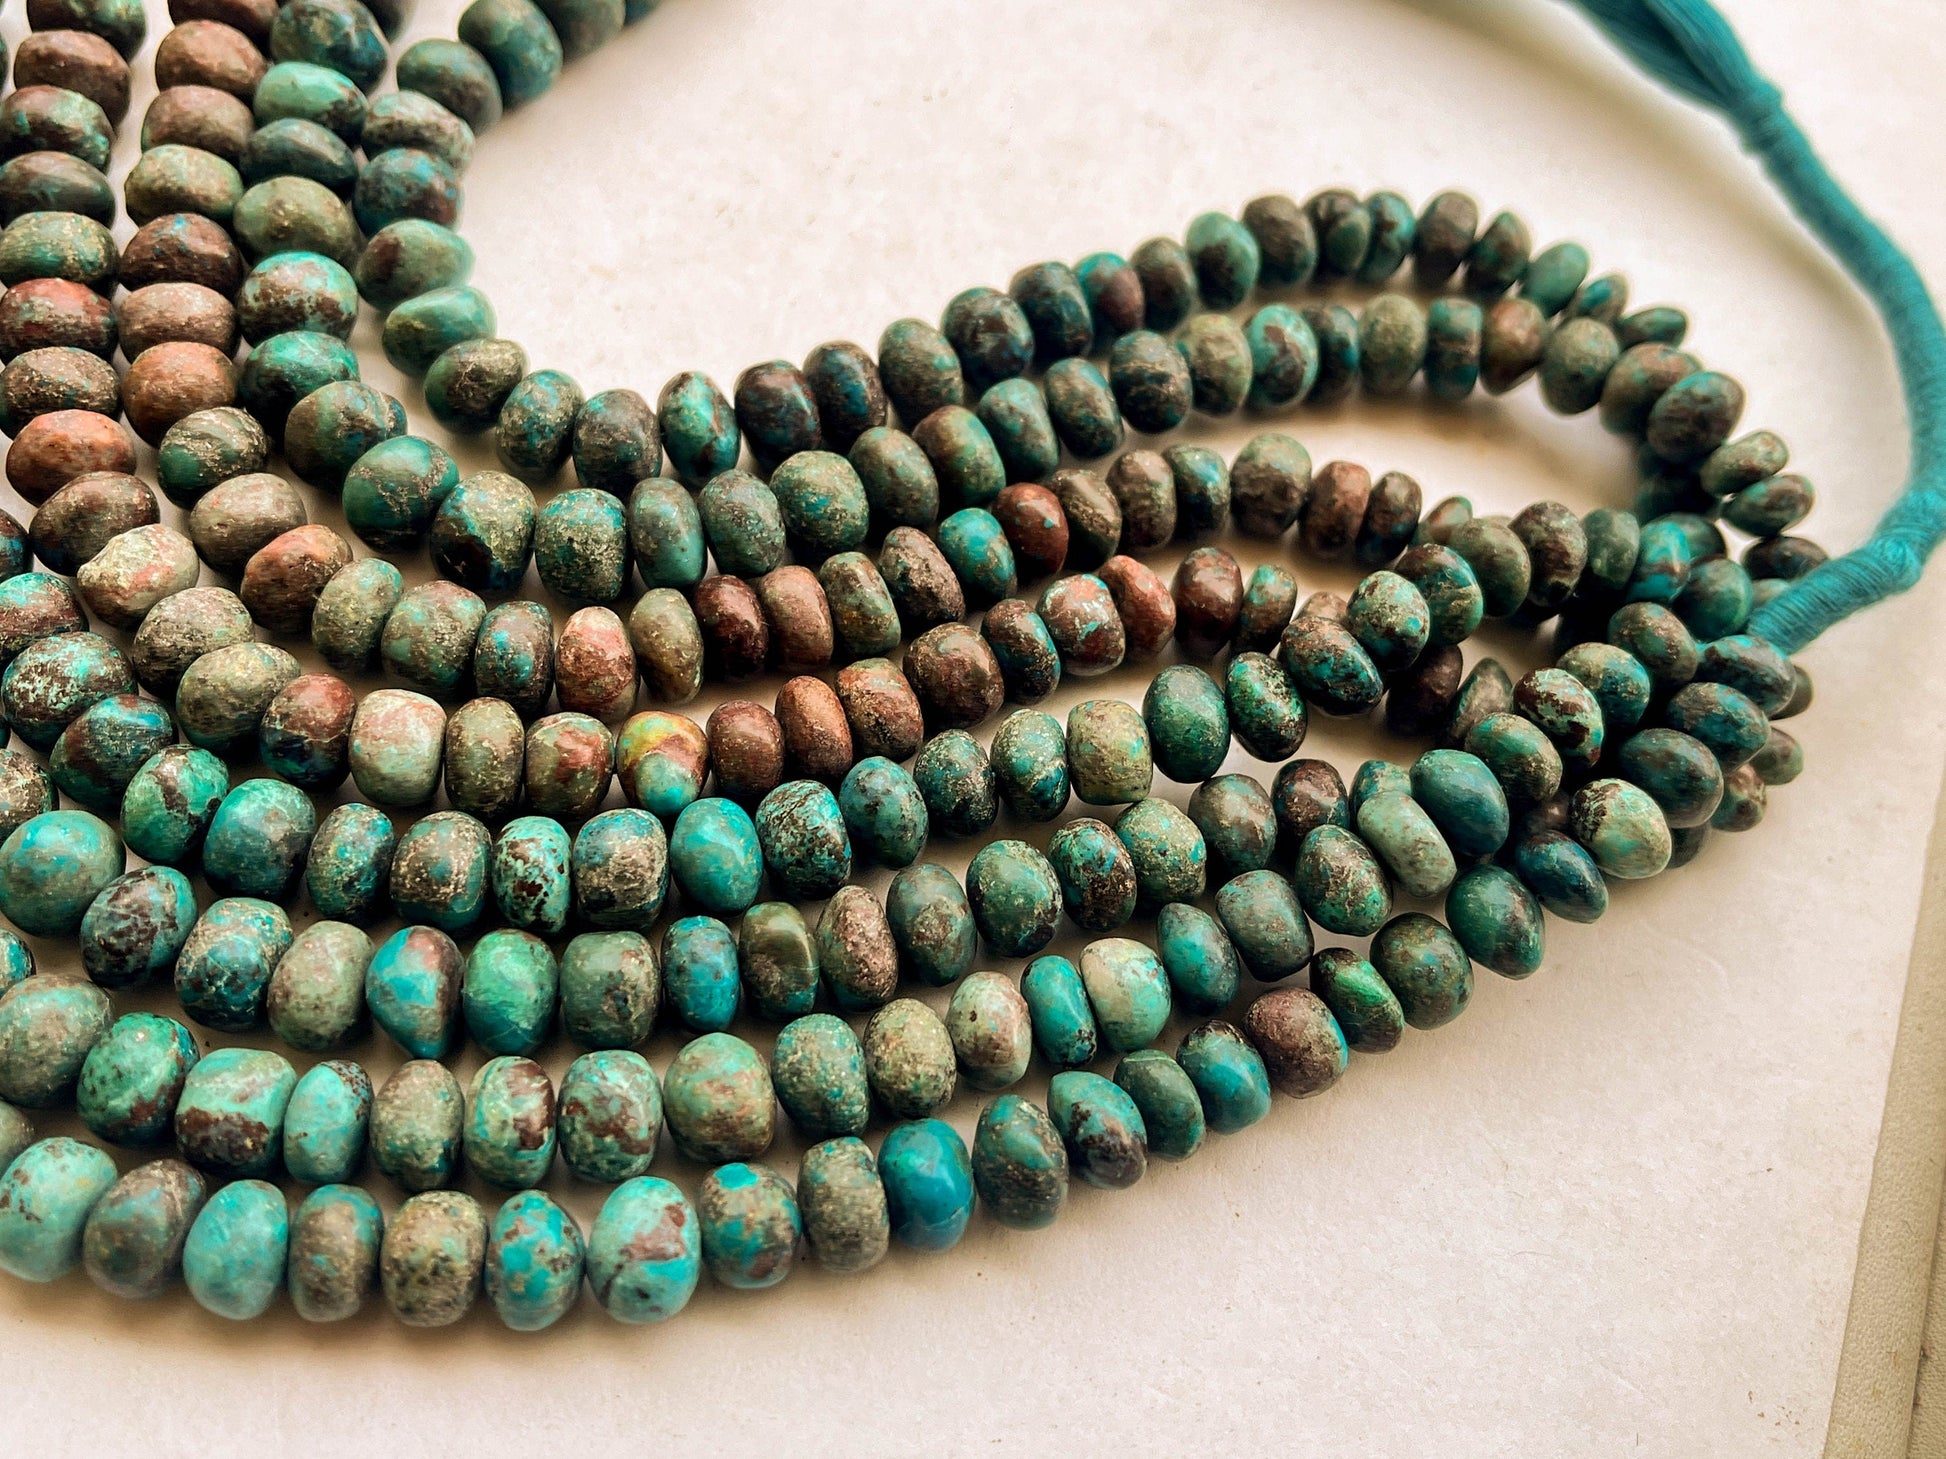 Chrysocolla Smooth Rondelle Shape Beads | 6MM to 9MM | 16 Inch Beadsforyourjewelry